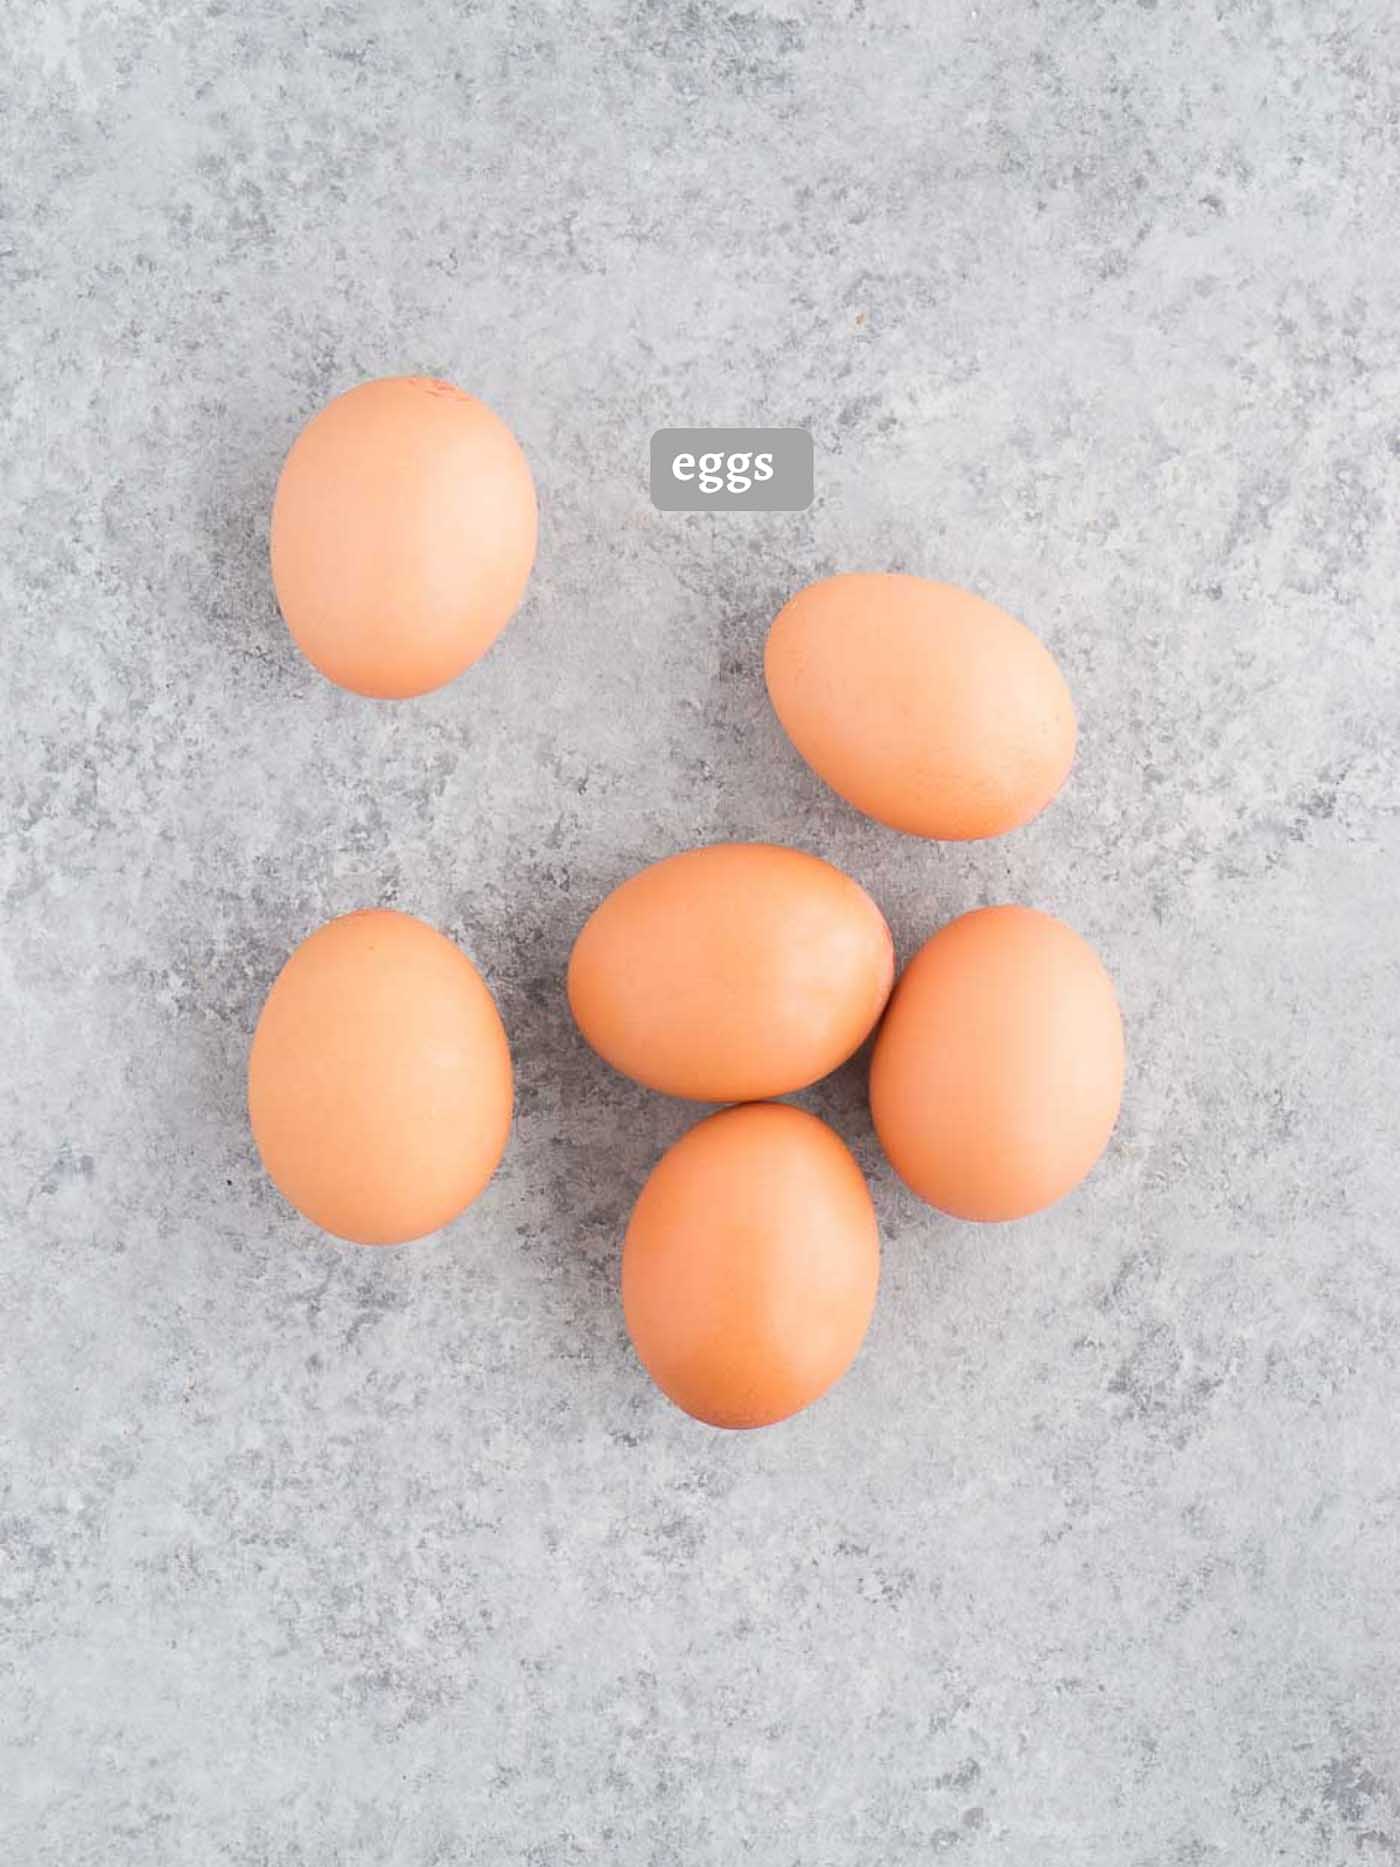 eggs on a board